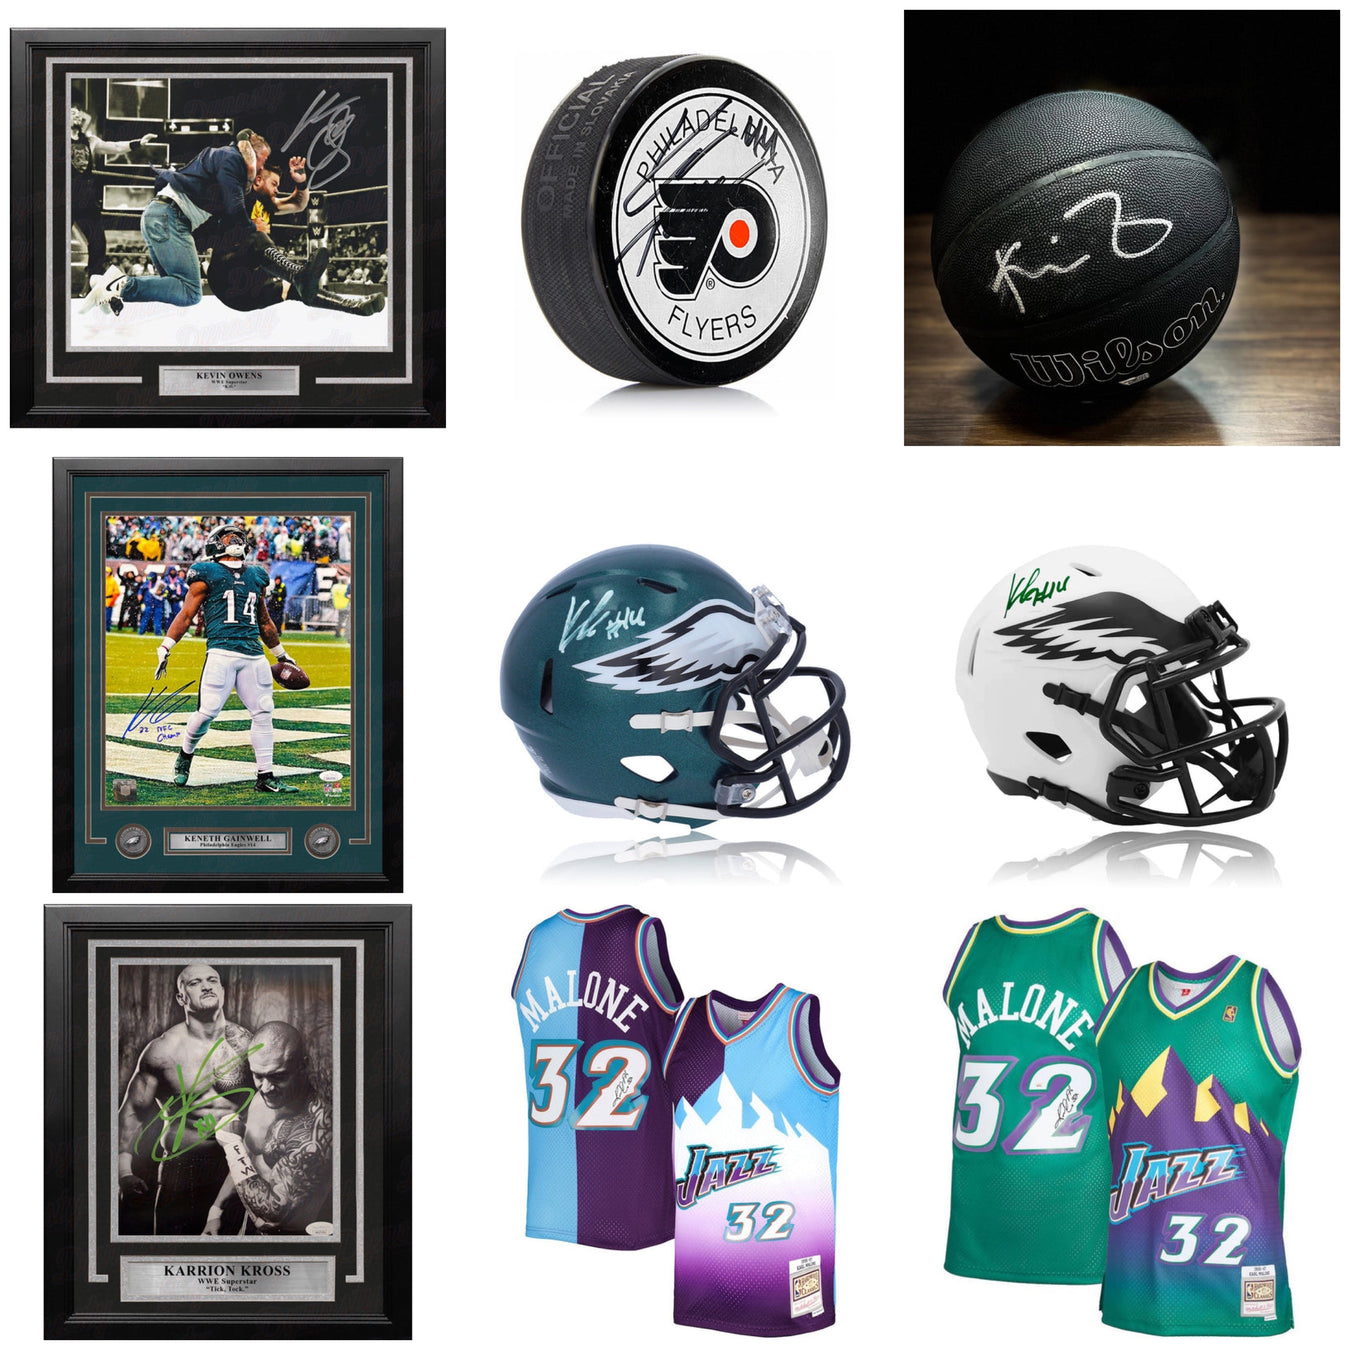 All Autographed Items